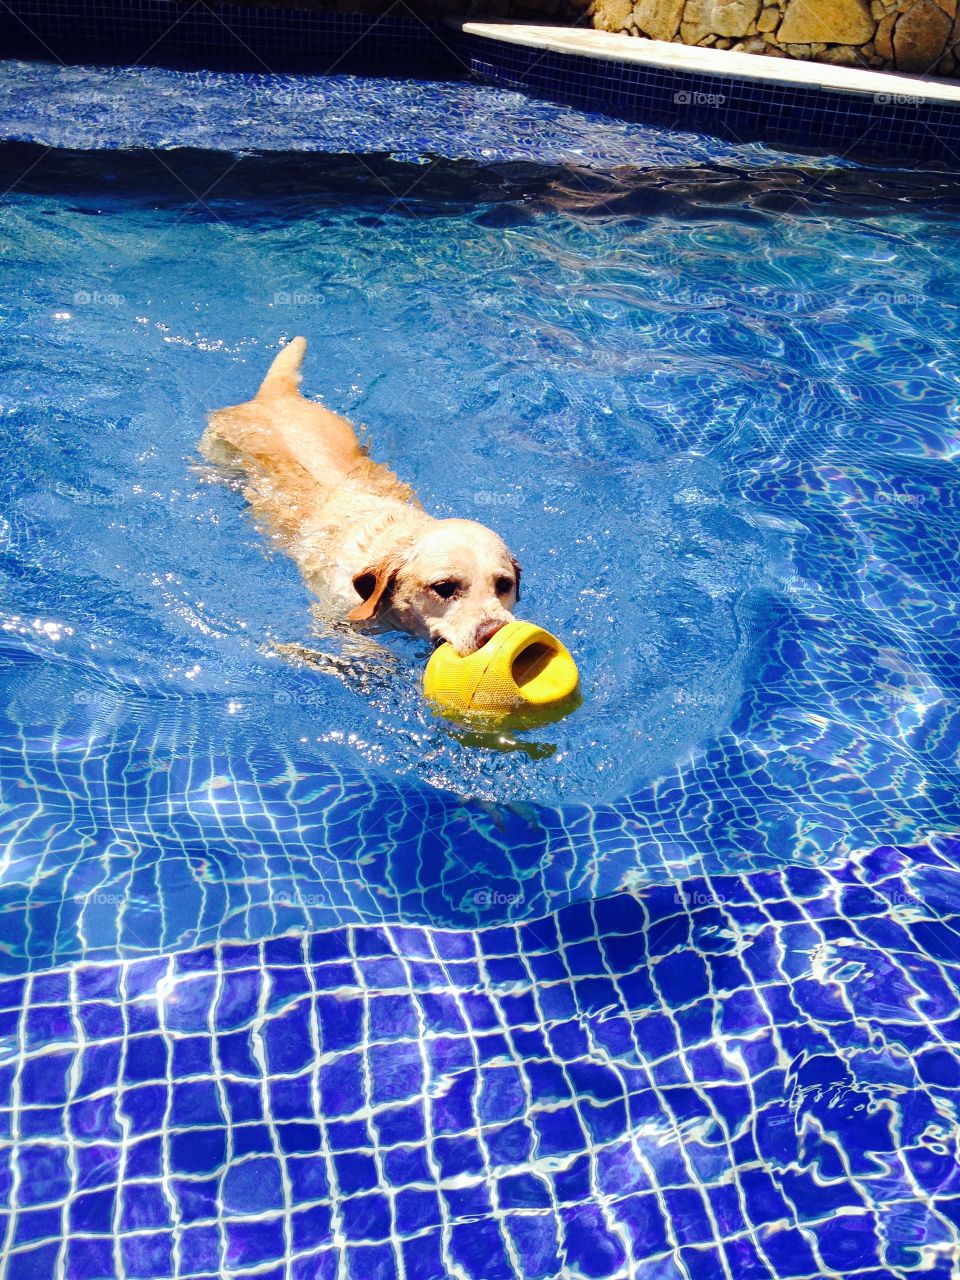 Love swimming with balls